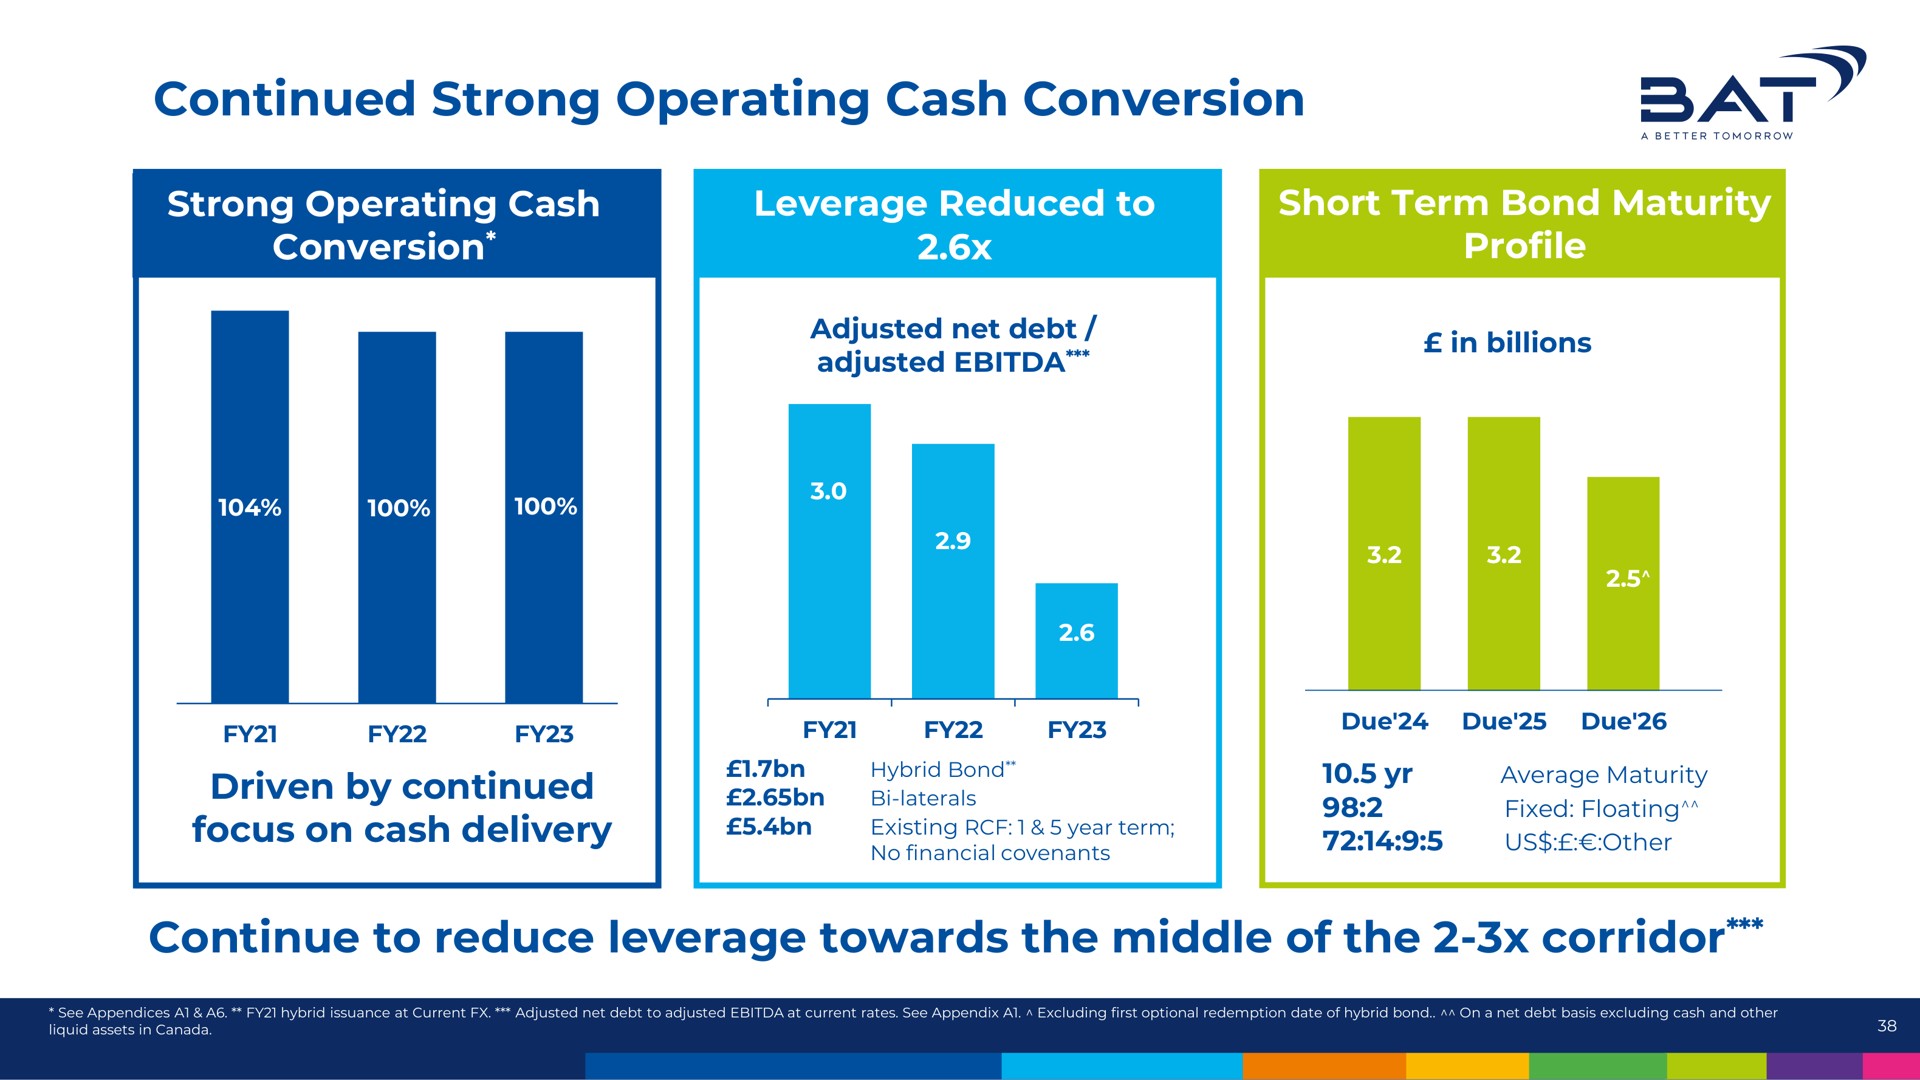 continued strong operating cash conversion a continue to reduce leverage towards the middle of the corridor | BAT